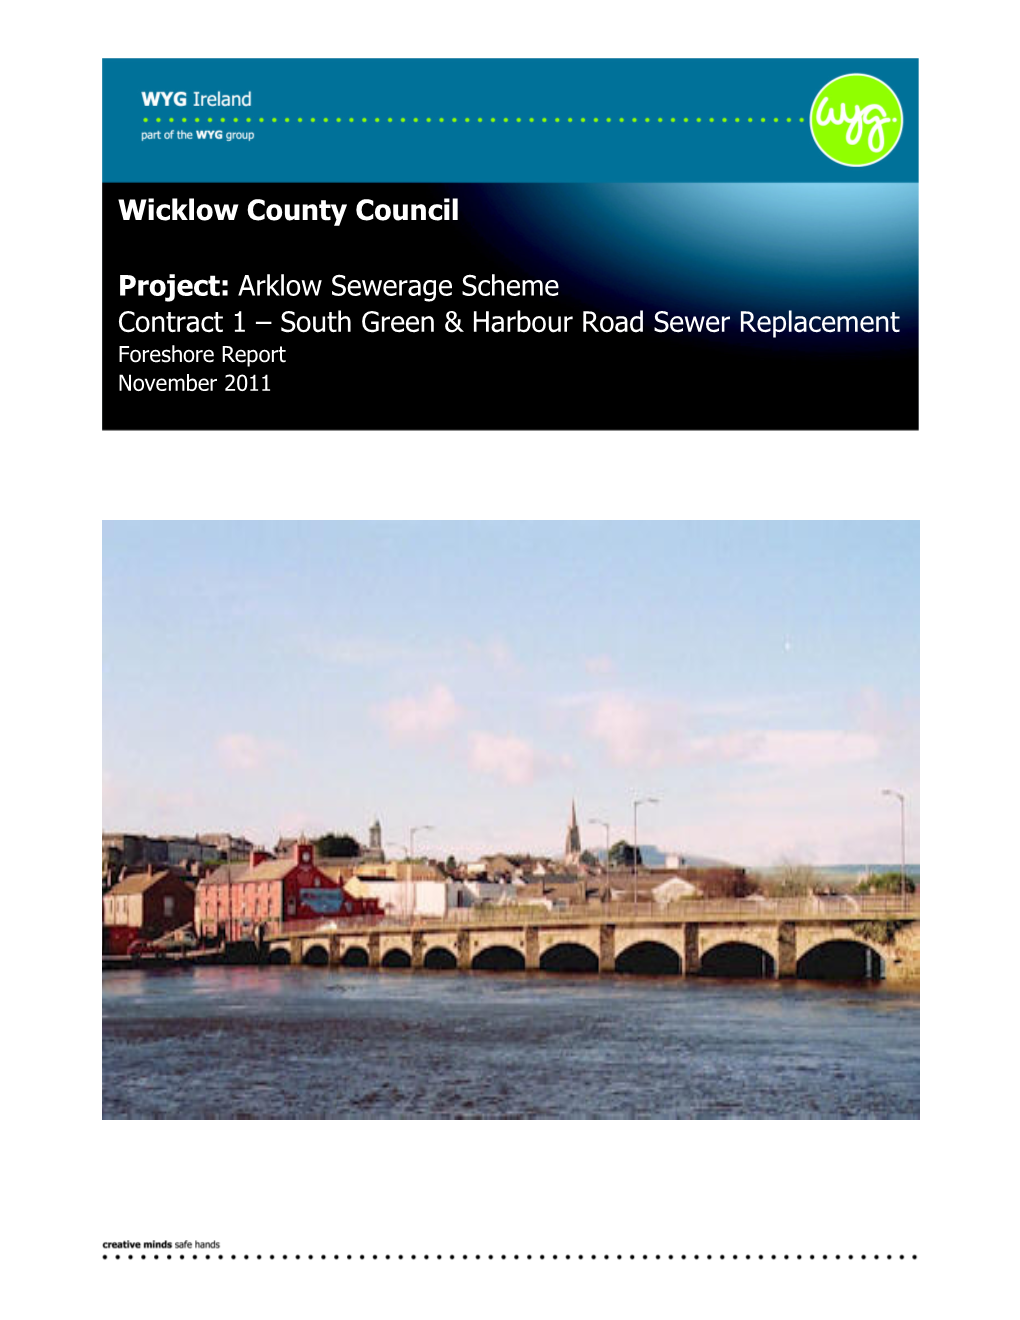 Arklow Sewerage Scheme Contract 1 Œ South Green & Harbour Road